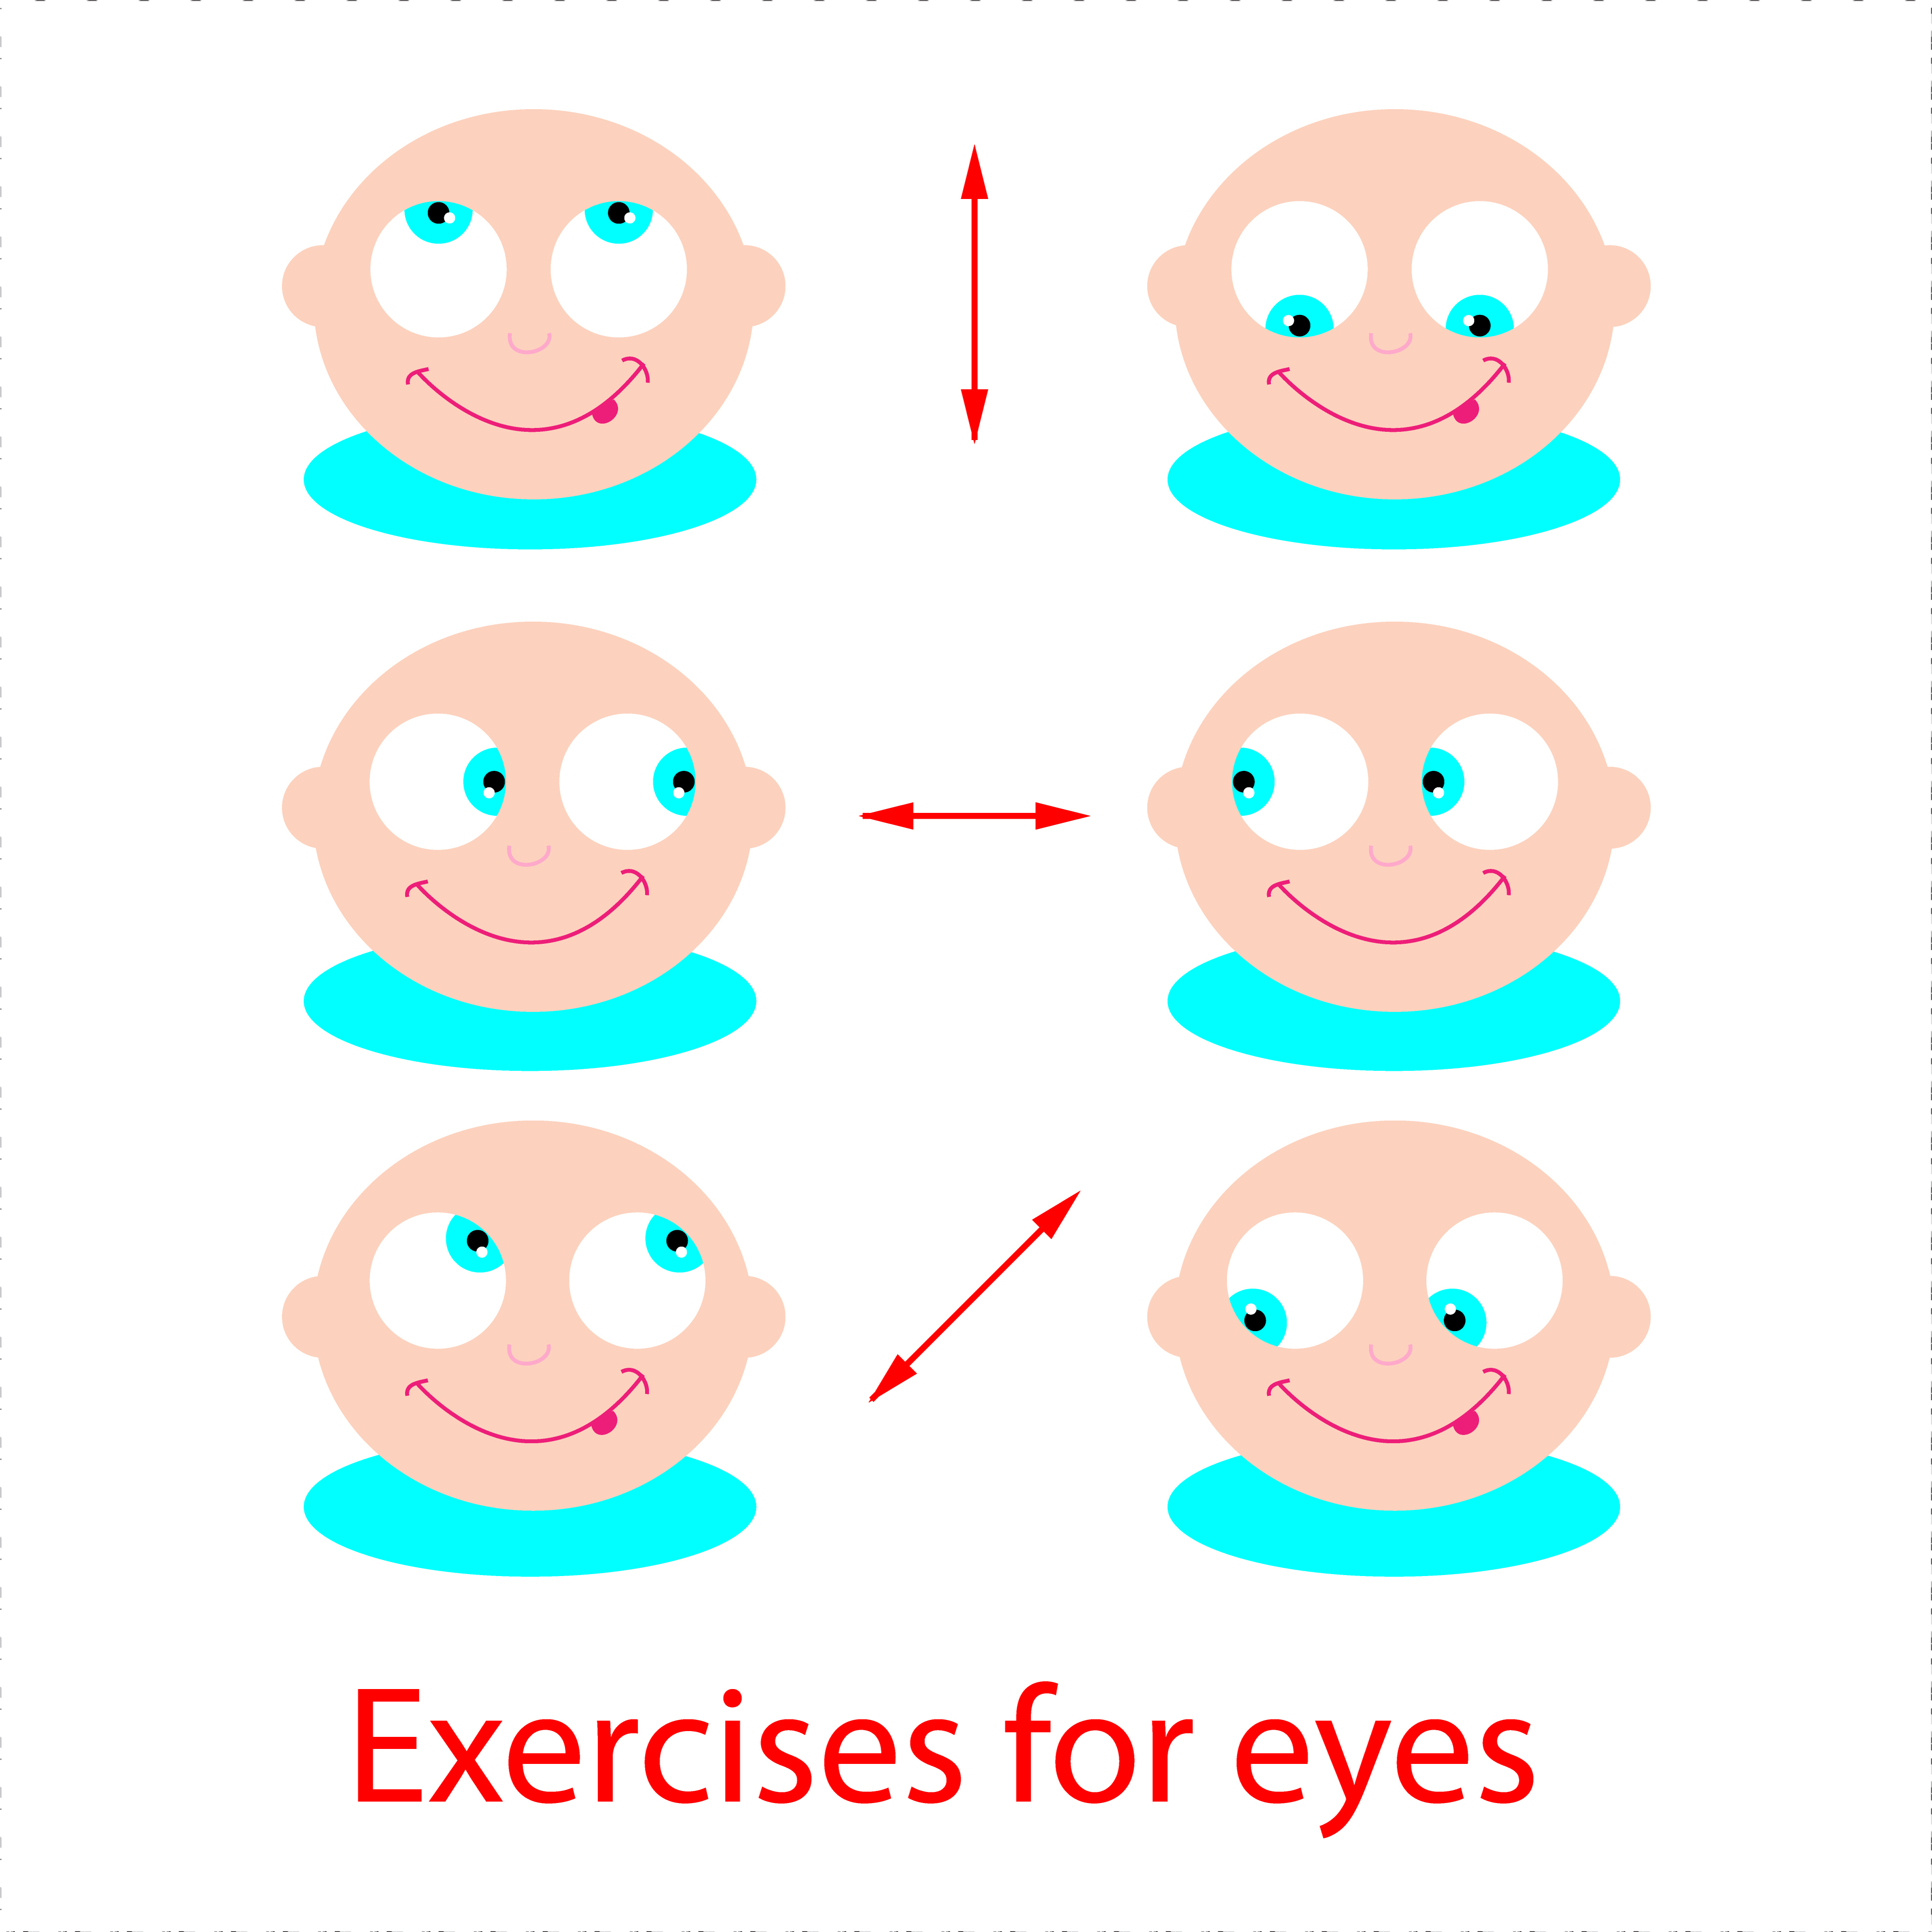 Exercise the muscles around your eyes